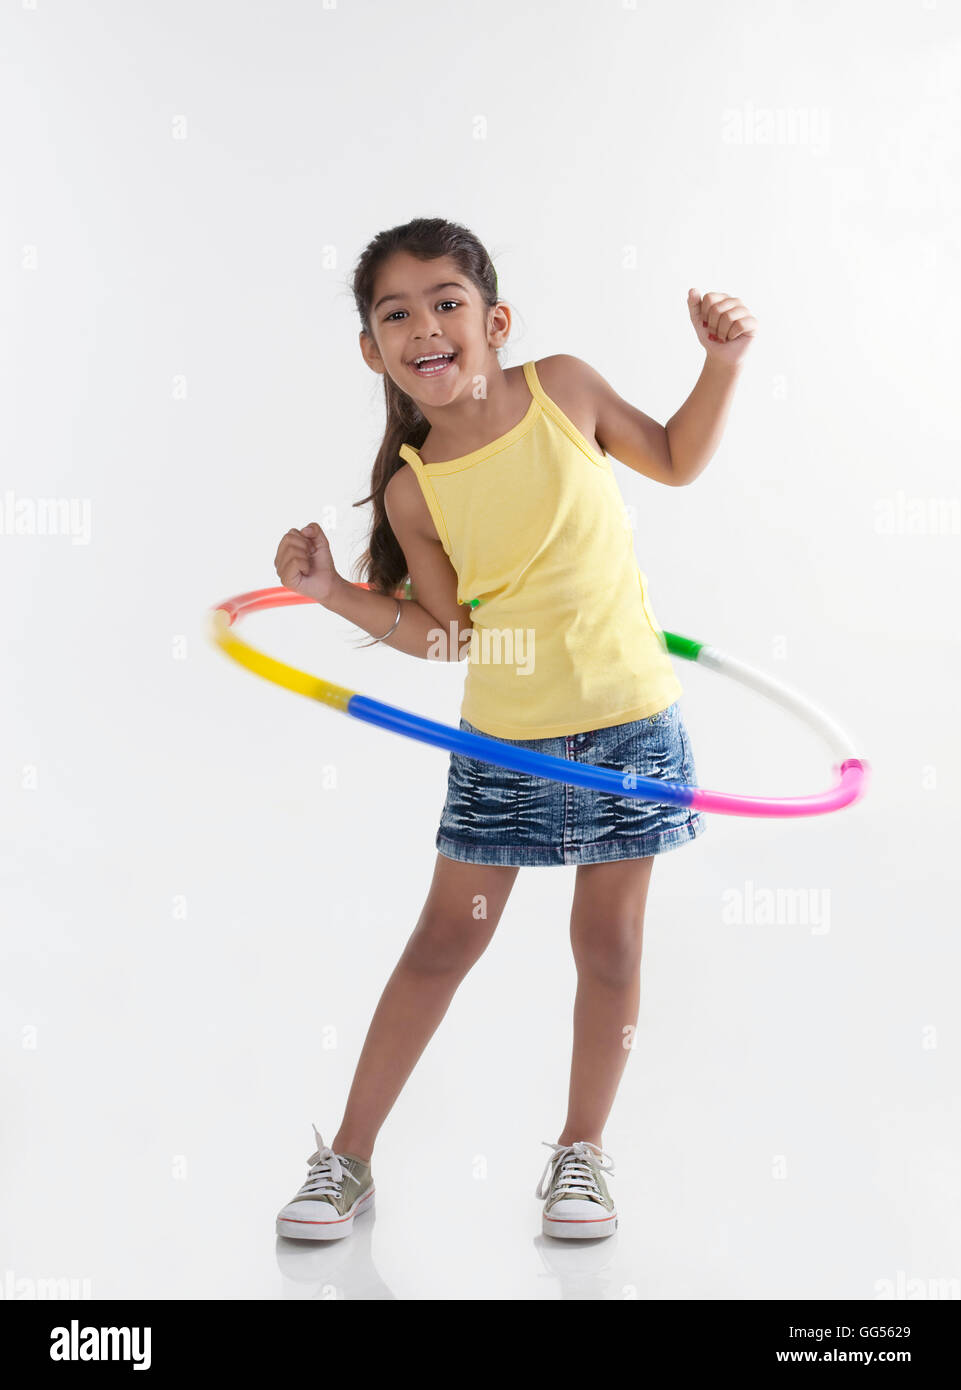 Girl playing with a hoola hoop Stock Photo